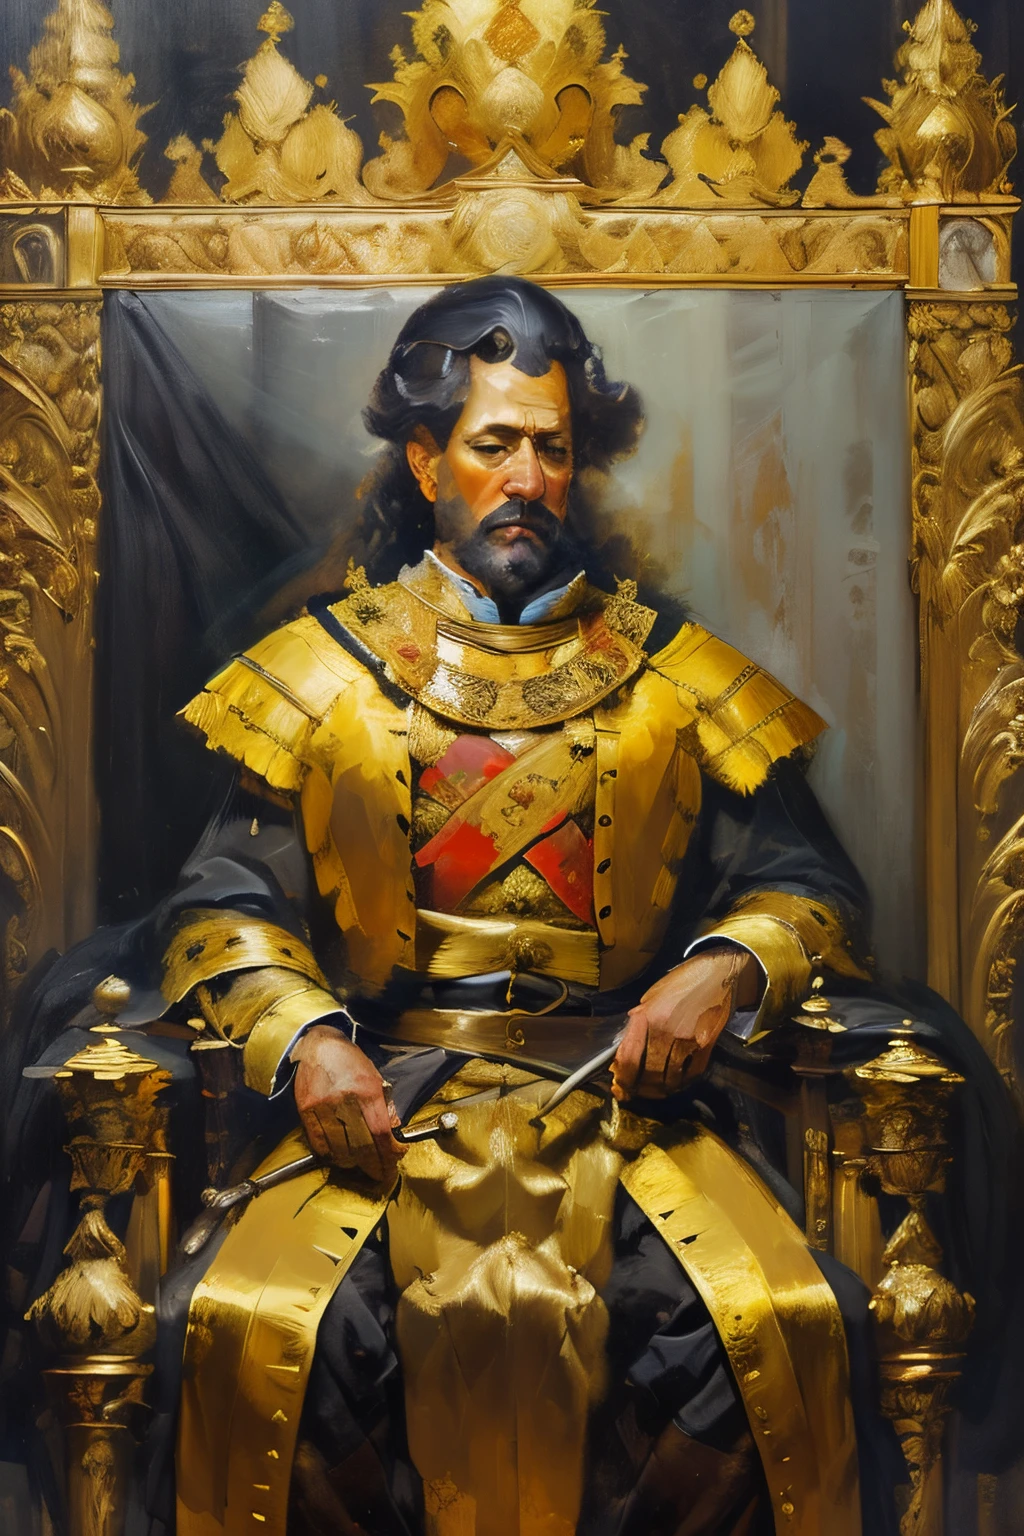 (oil painting,brushstrokes),(18th century),(king sitting on throne),(detailed facial expression),royal attire,regal surroundings,golden crown and scepter,historical setting,soft lighting,rich color palette,luxurious textures,portrait style,classic artistry